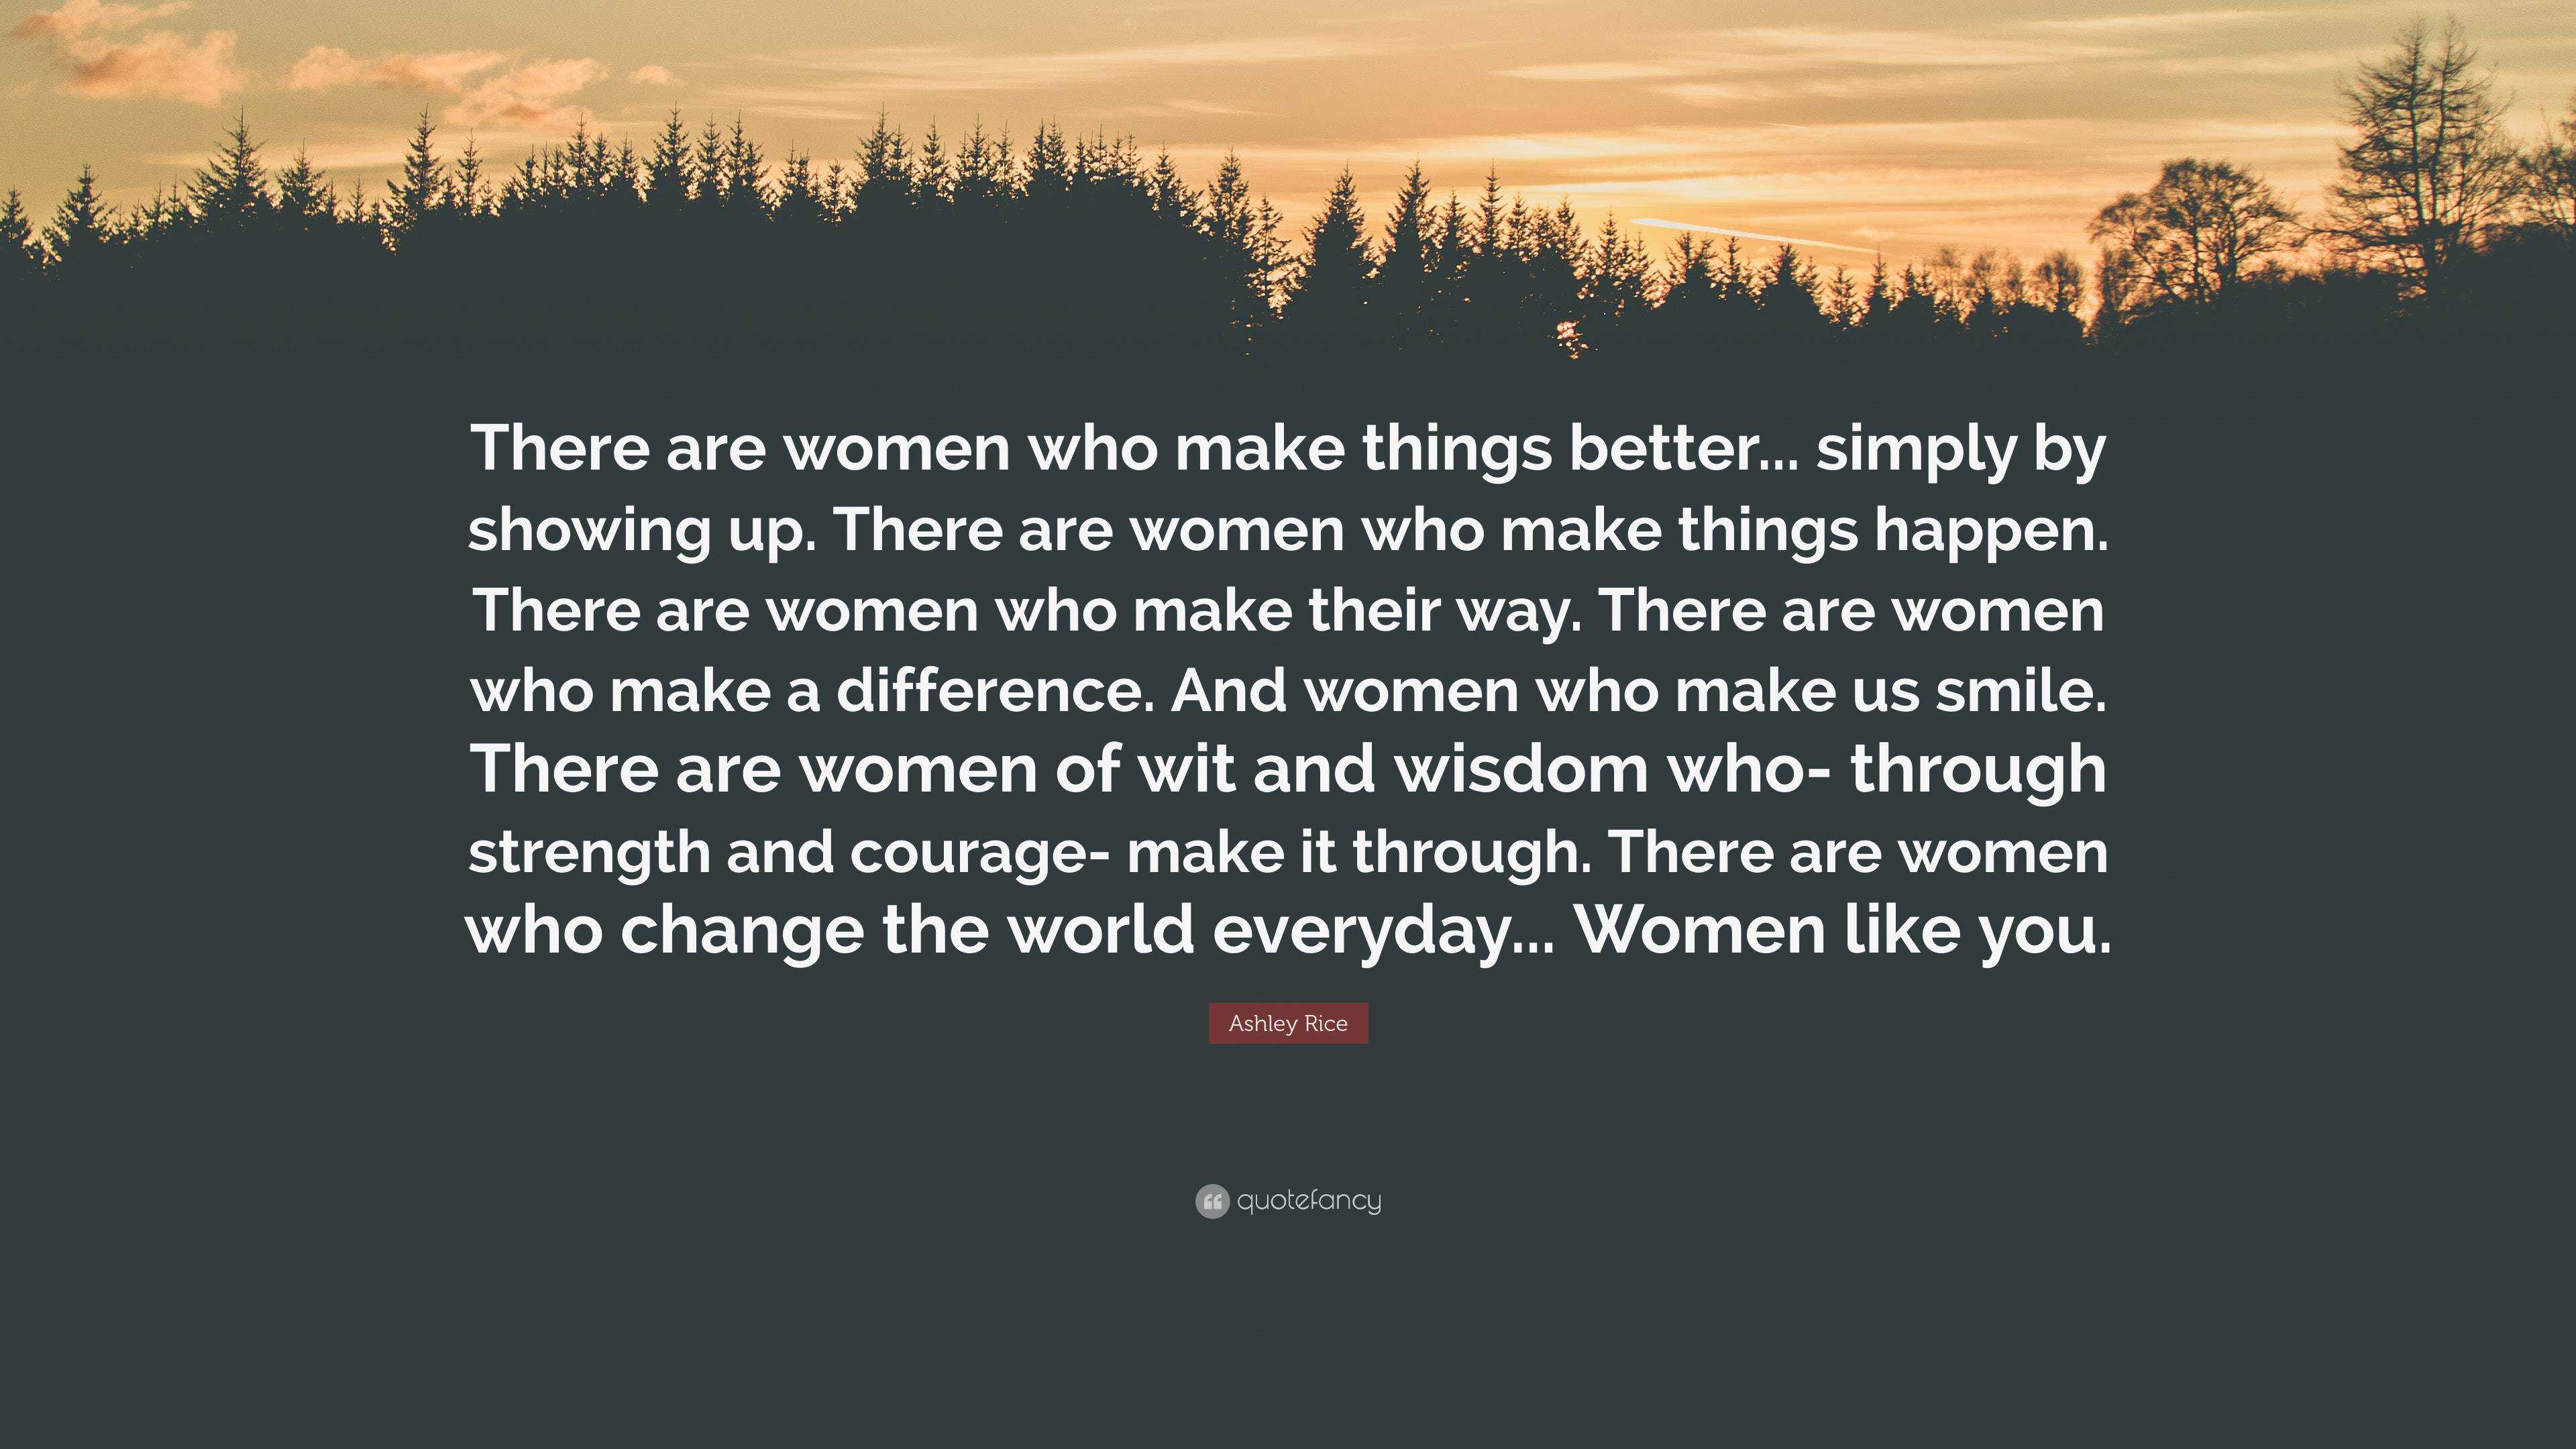 Ashley Rice Quote: “There are women who make things better... simply by ...